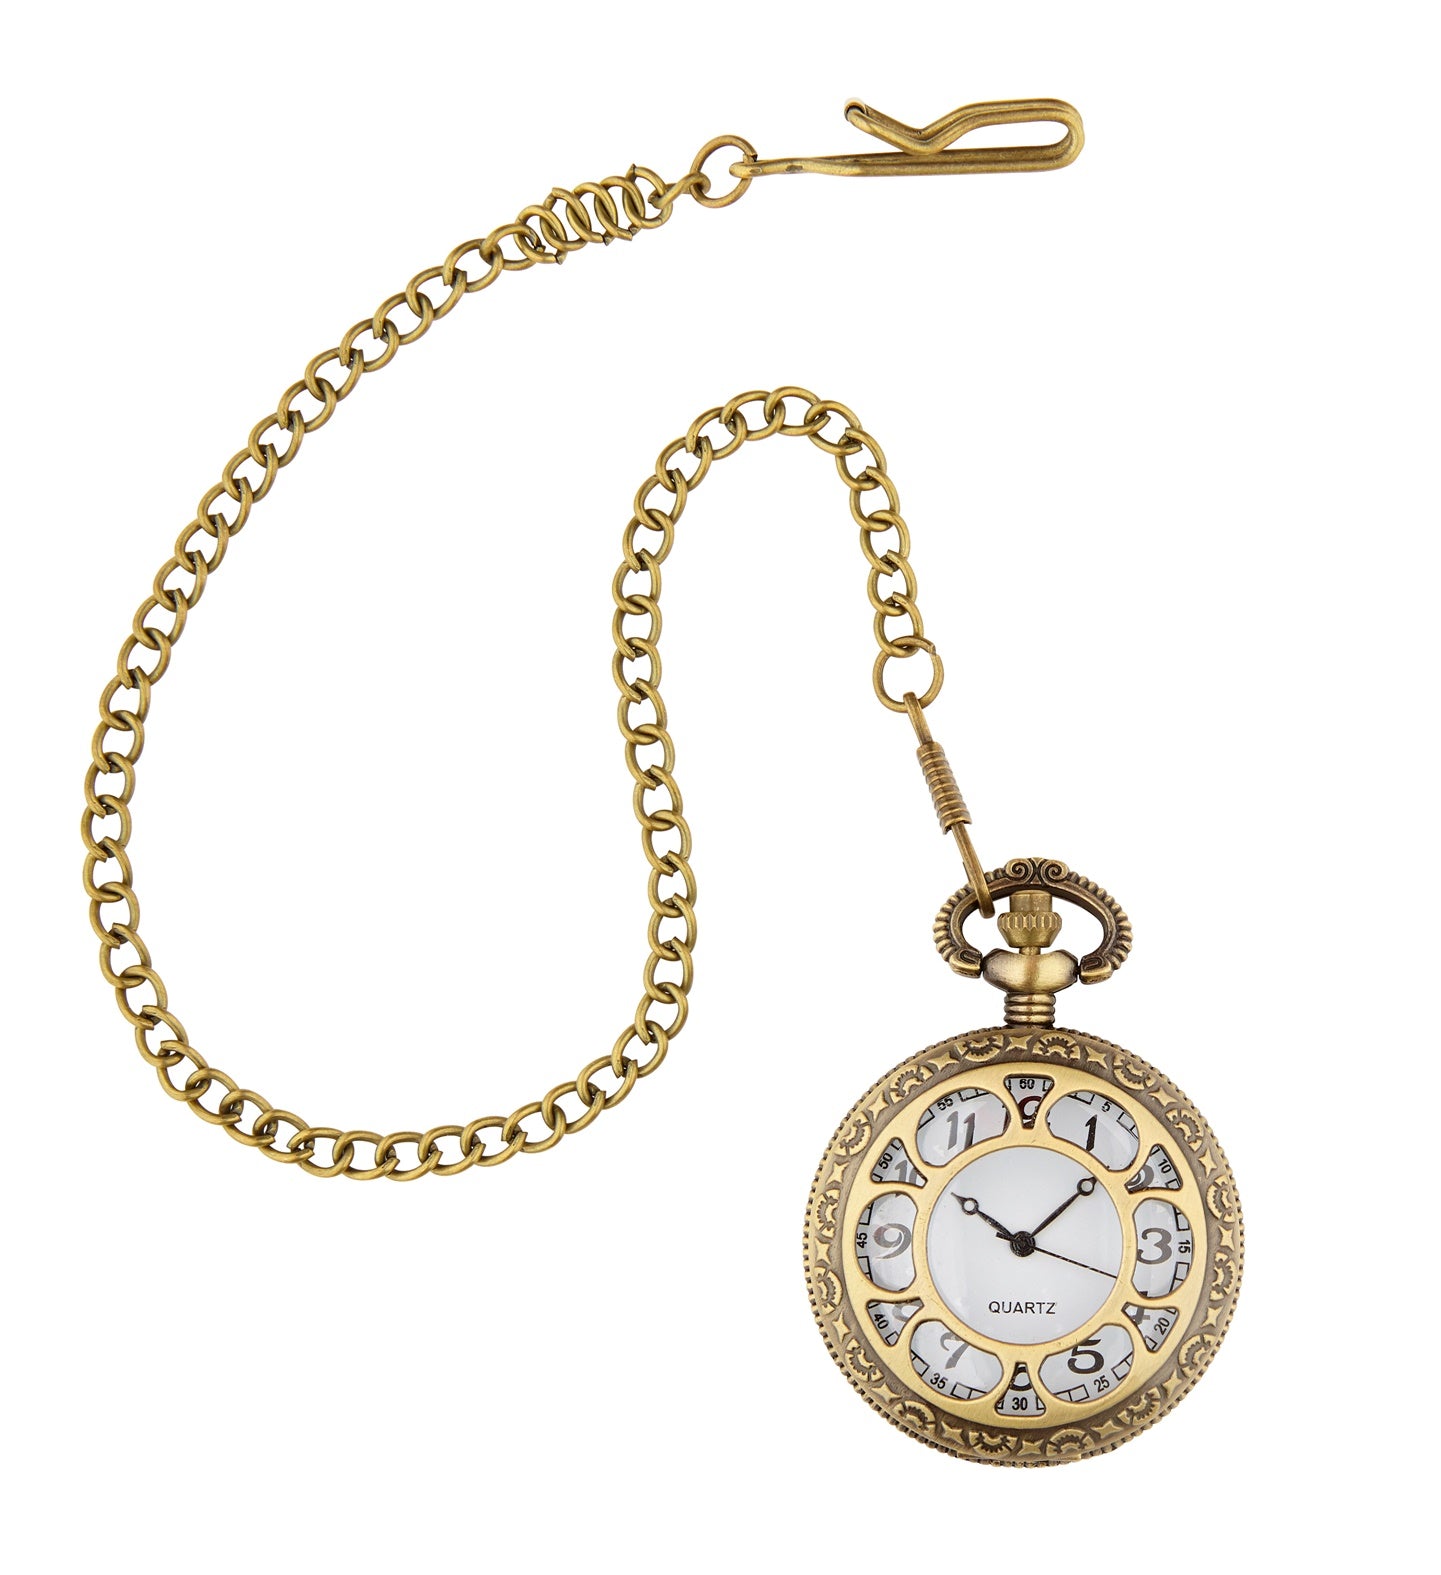 Mechanical Pocket Fob Watch with Chain